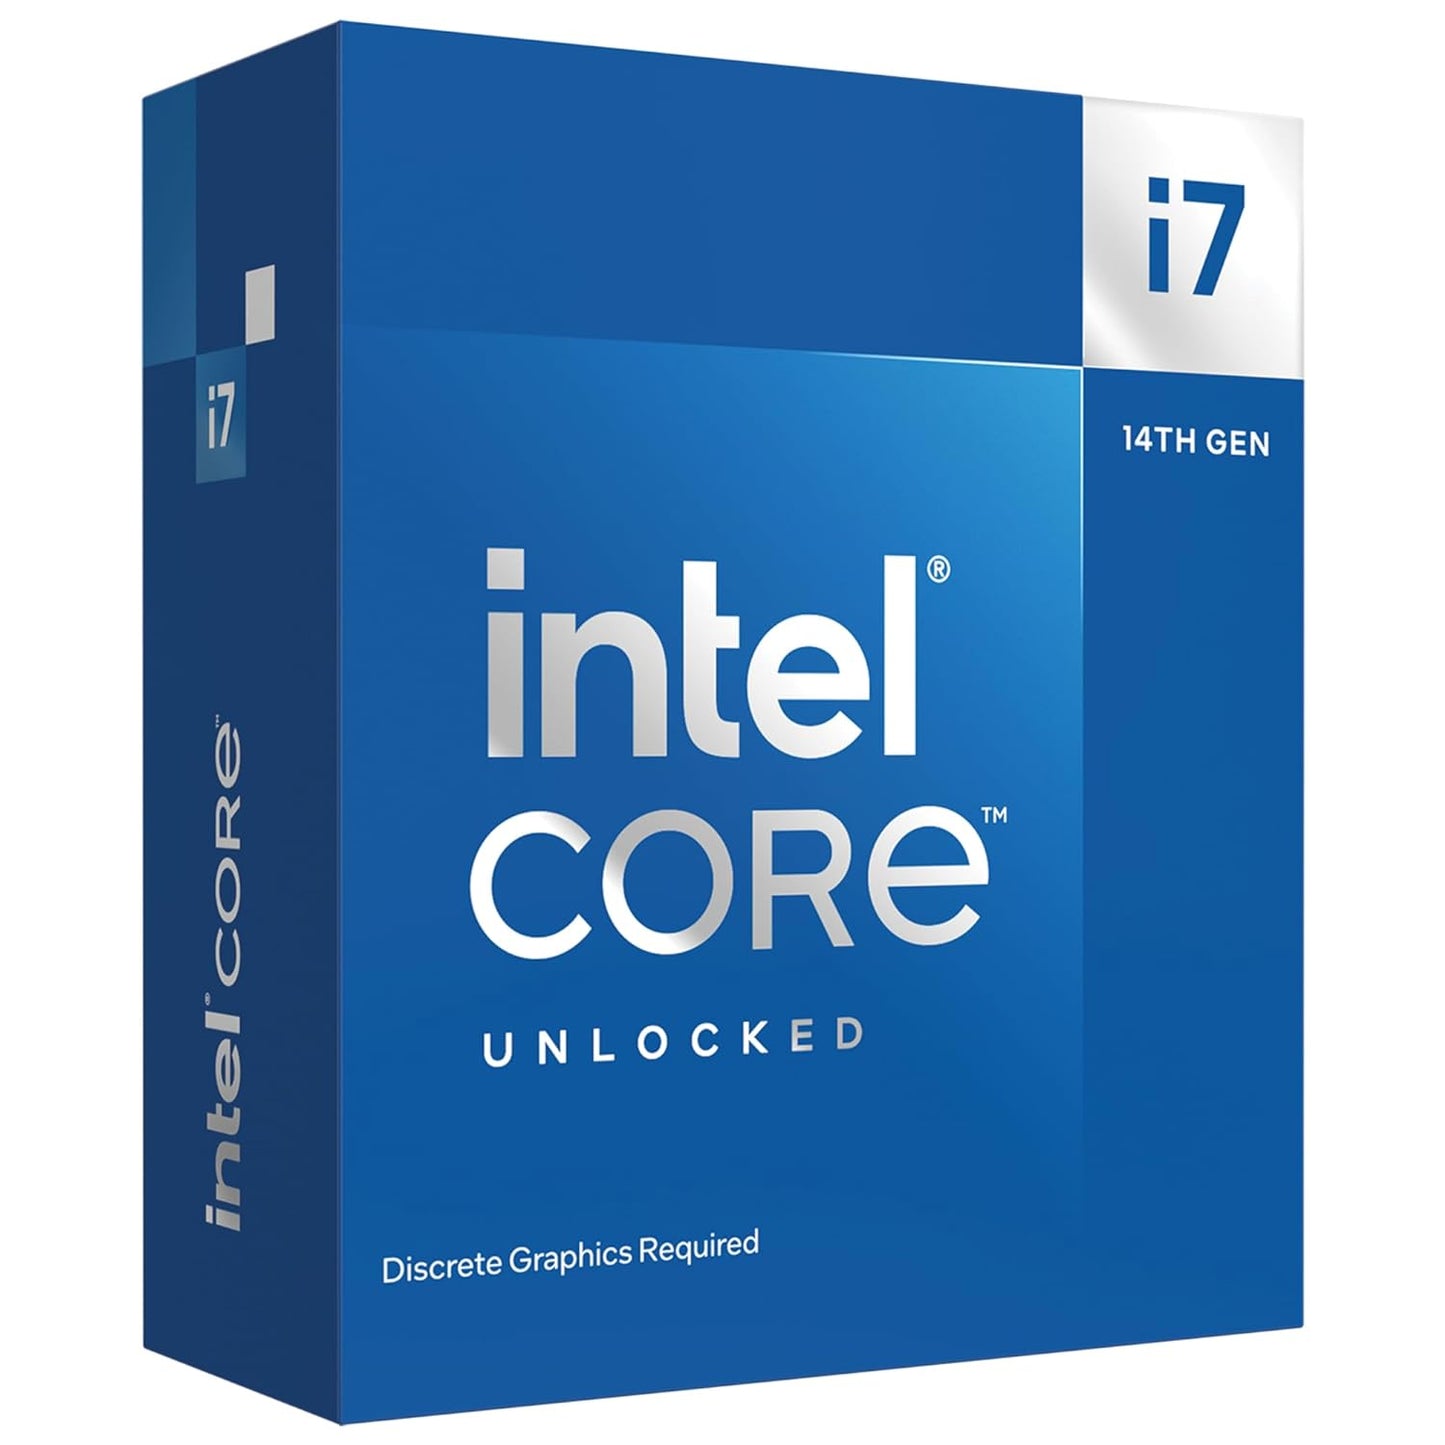 Intel Core i7-14700KF Processor with 28 Threads and 10 nm Fabrication Process